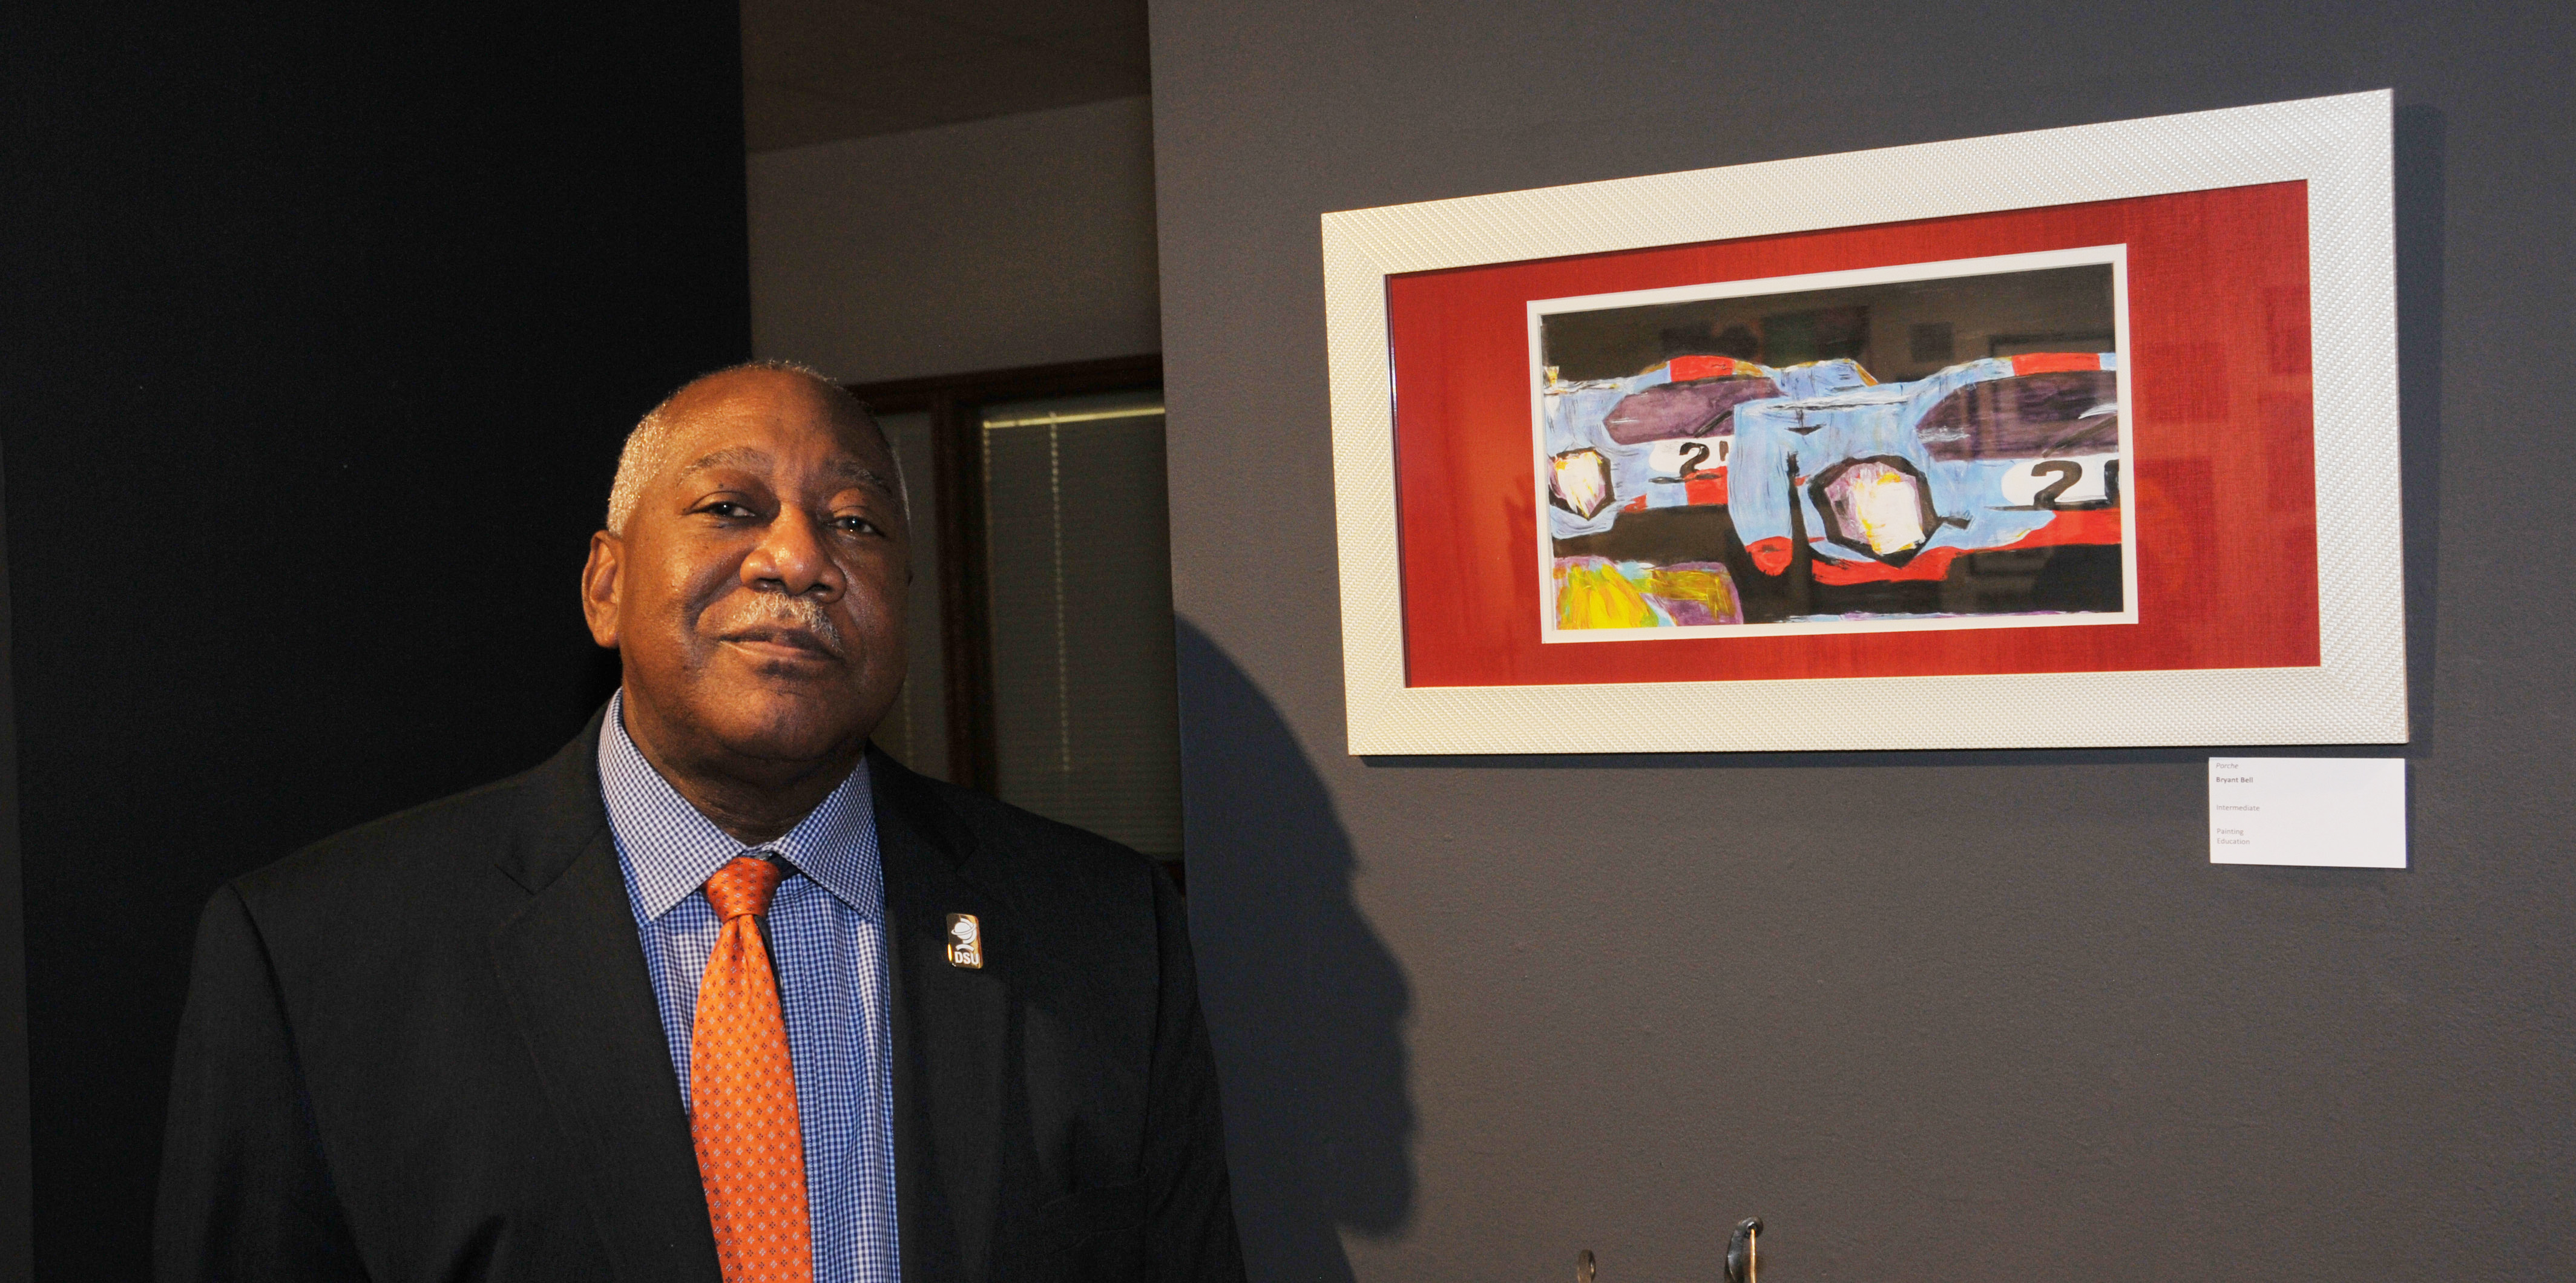 Bryant T. Bell stands with his acrylic painting "Porsche" that is part of the exhibition.